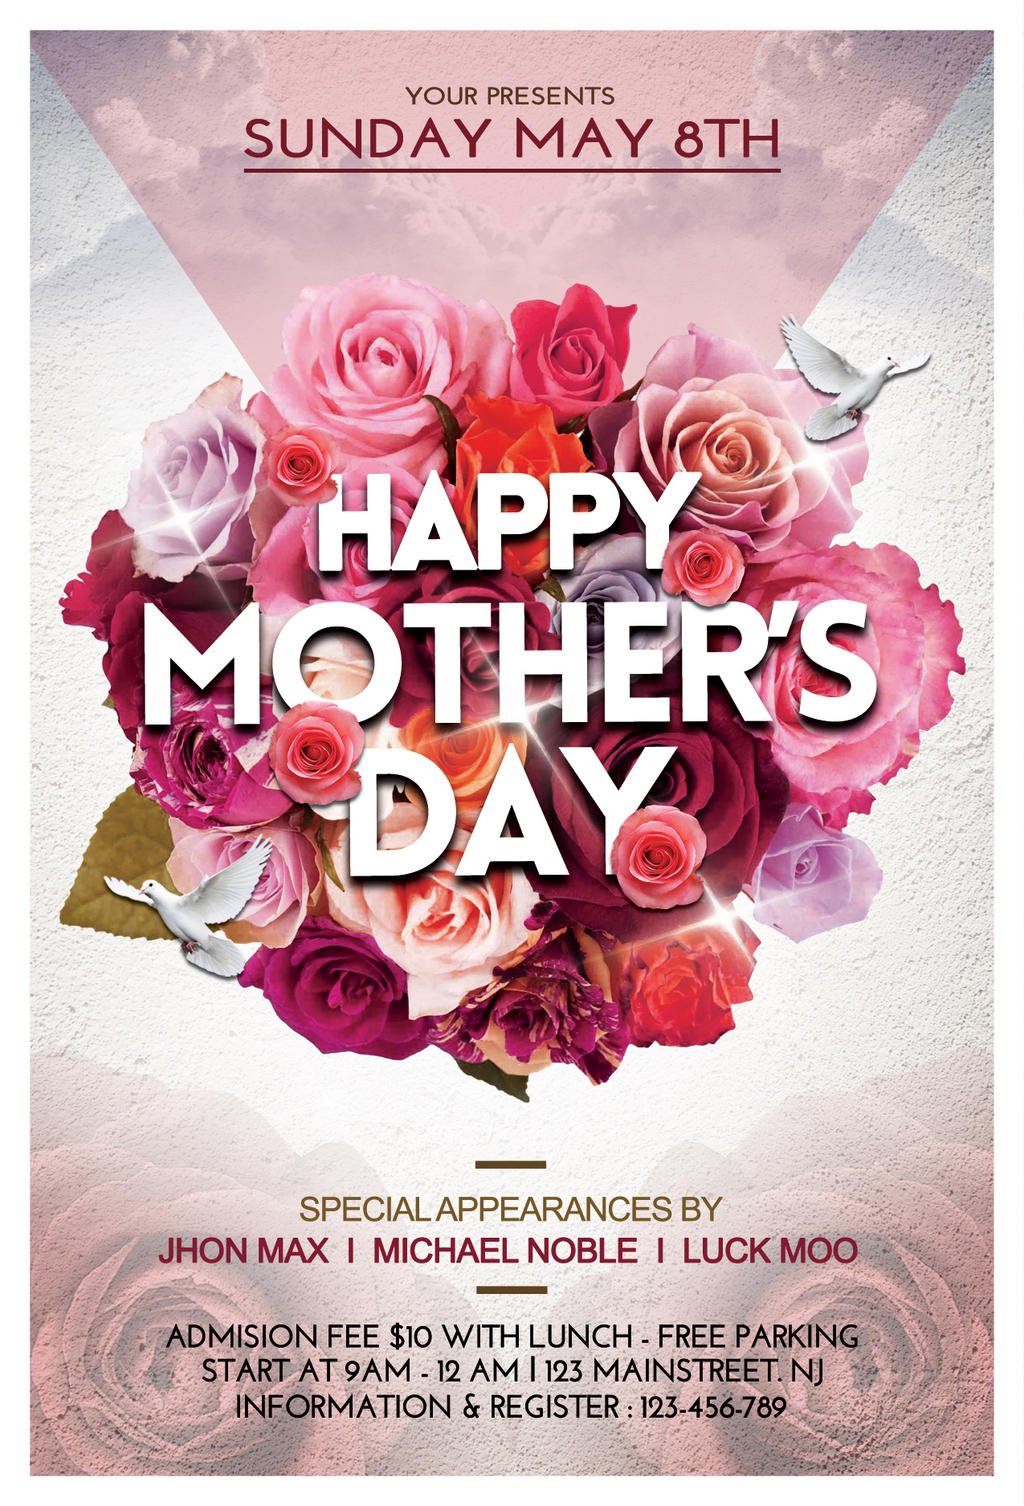 Mother's Day Flyer Template by ayumadesign on DeviantArt